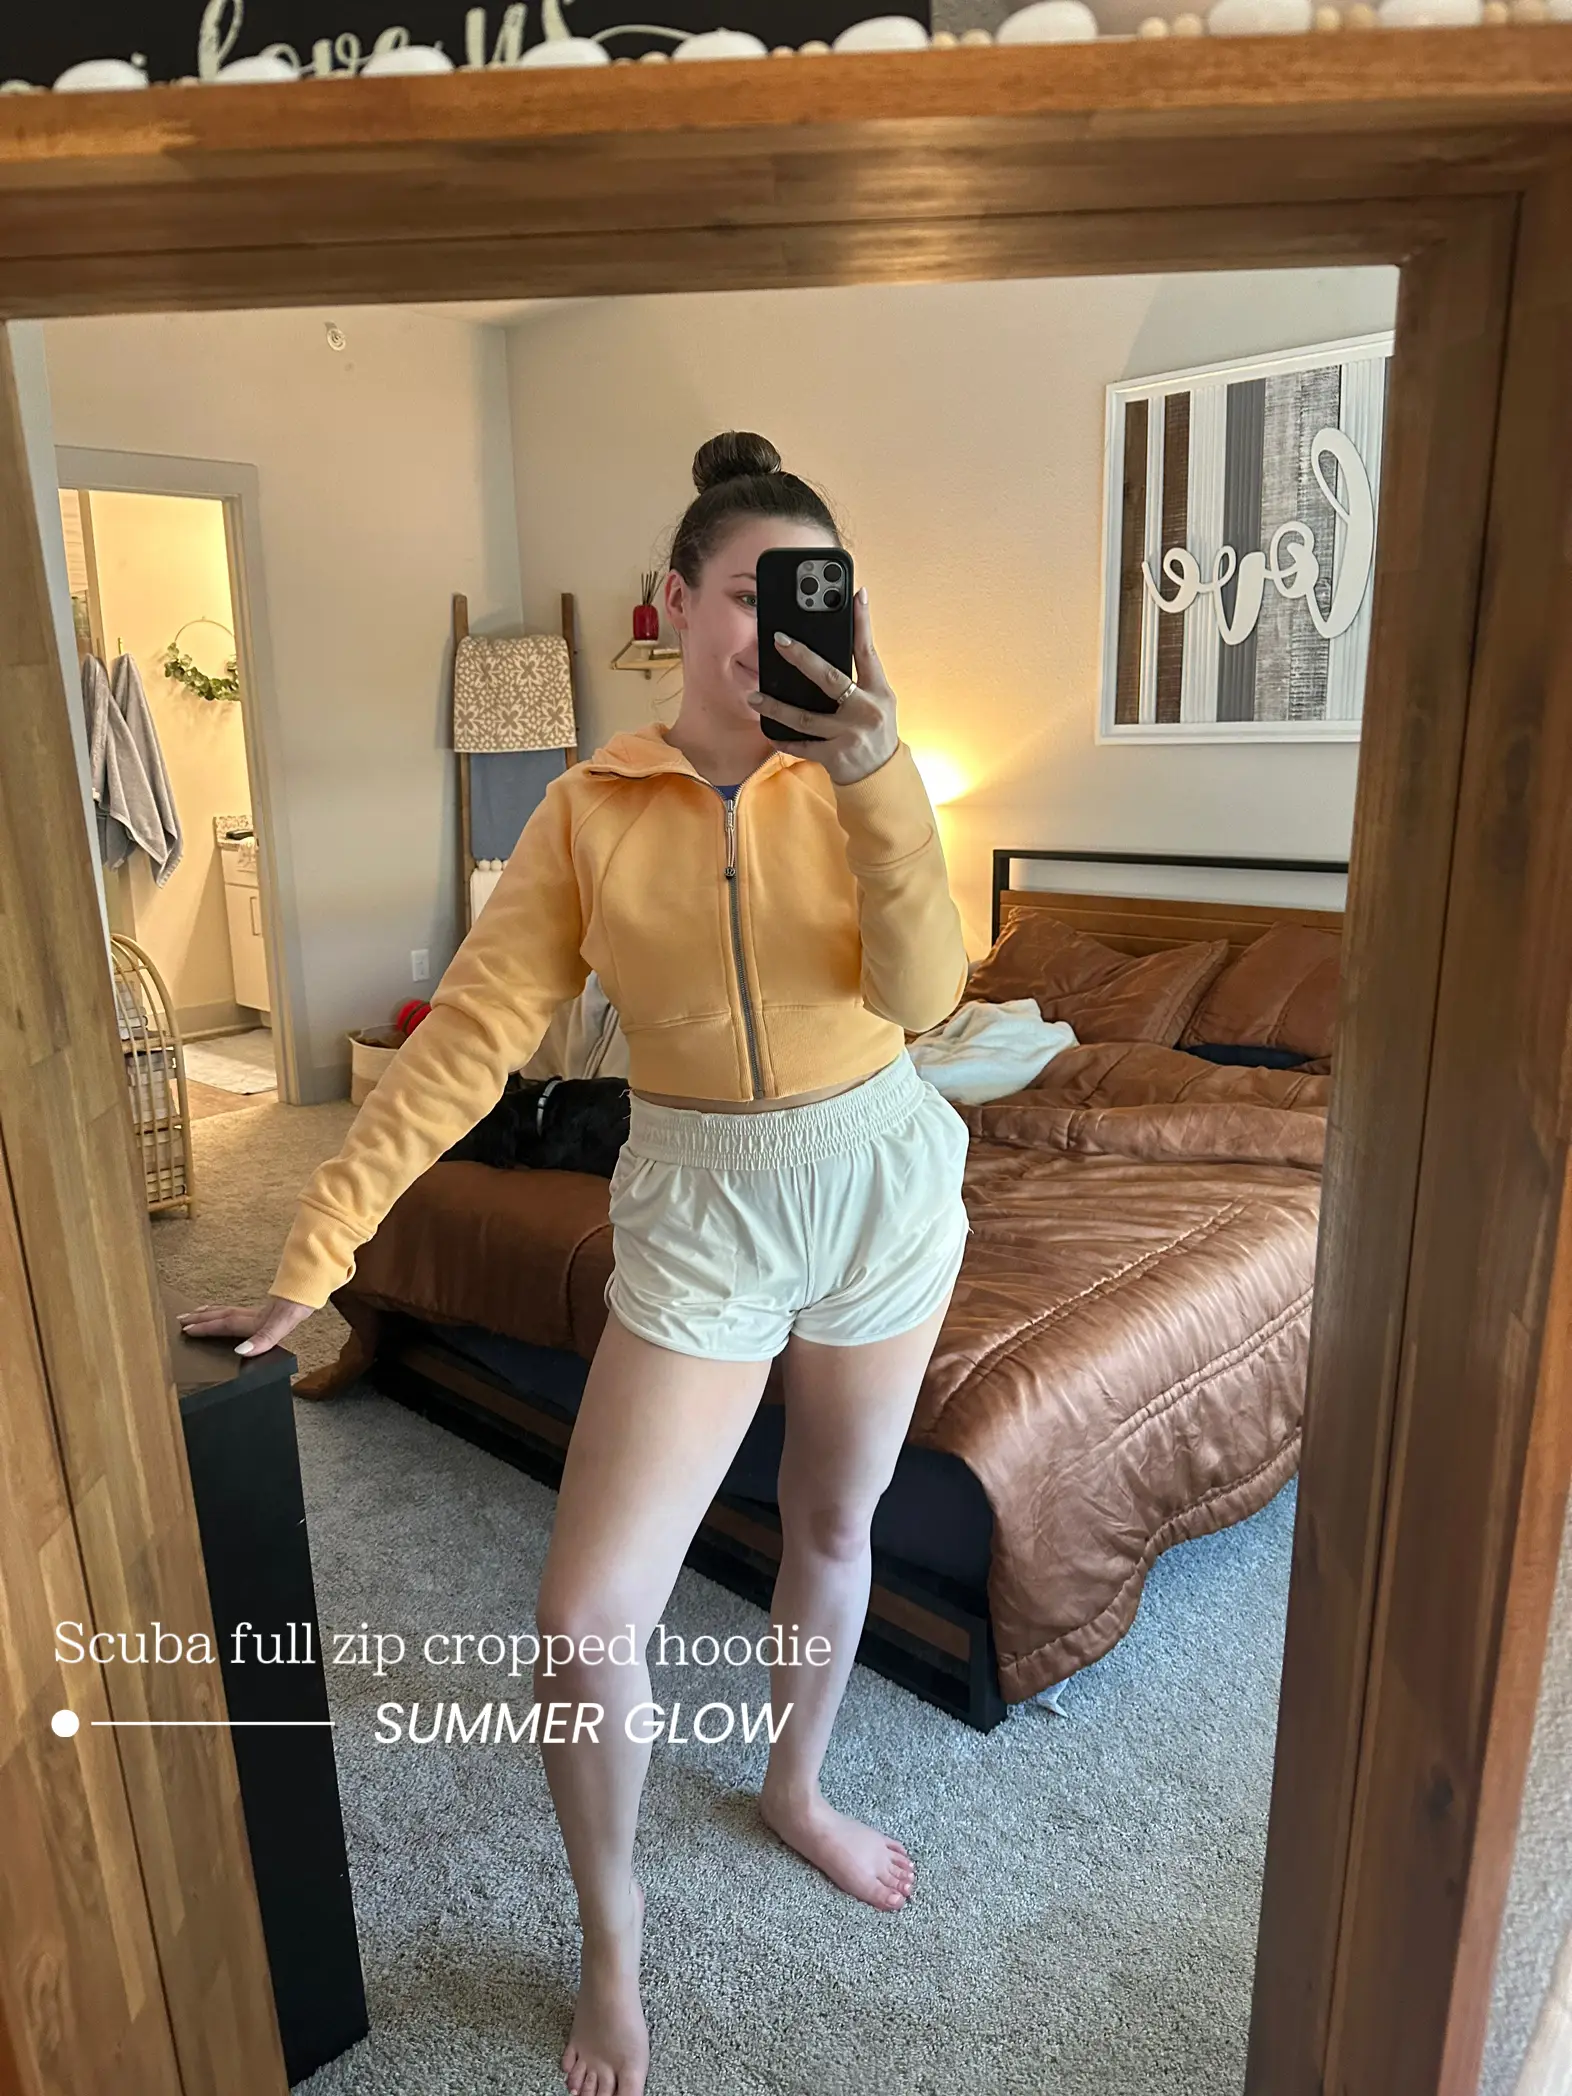 New lululemon scuba! 🍊🧡😍🍋, Gallery posted by Izzy